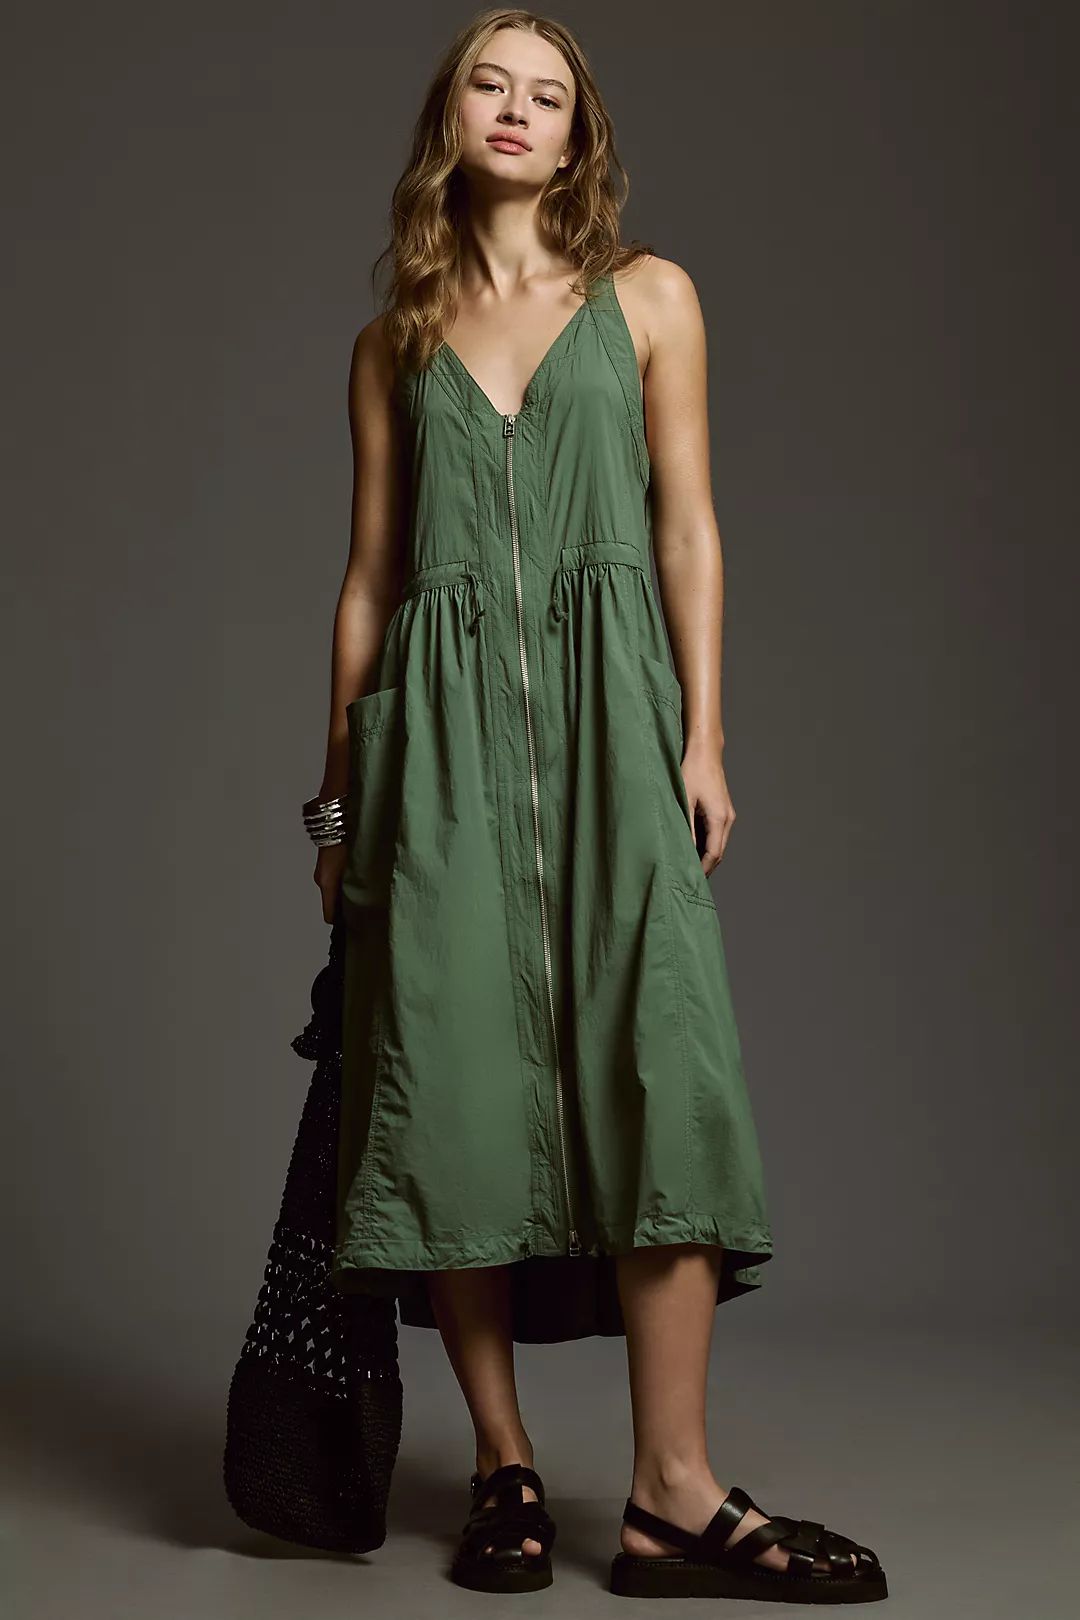 Daily Practice by Anthropologie Free Fall Dress | Anthropologie (US)